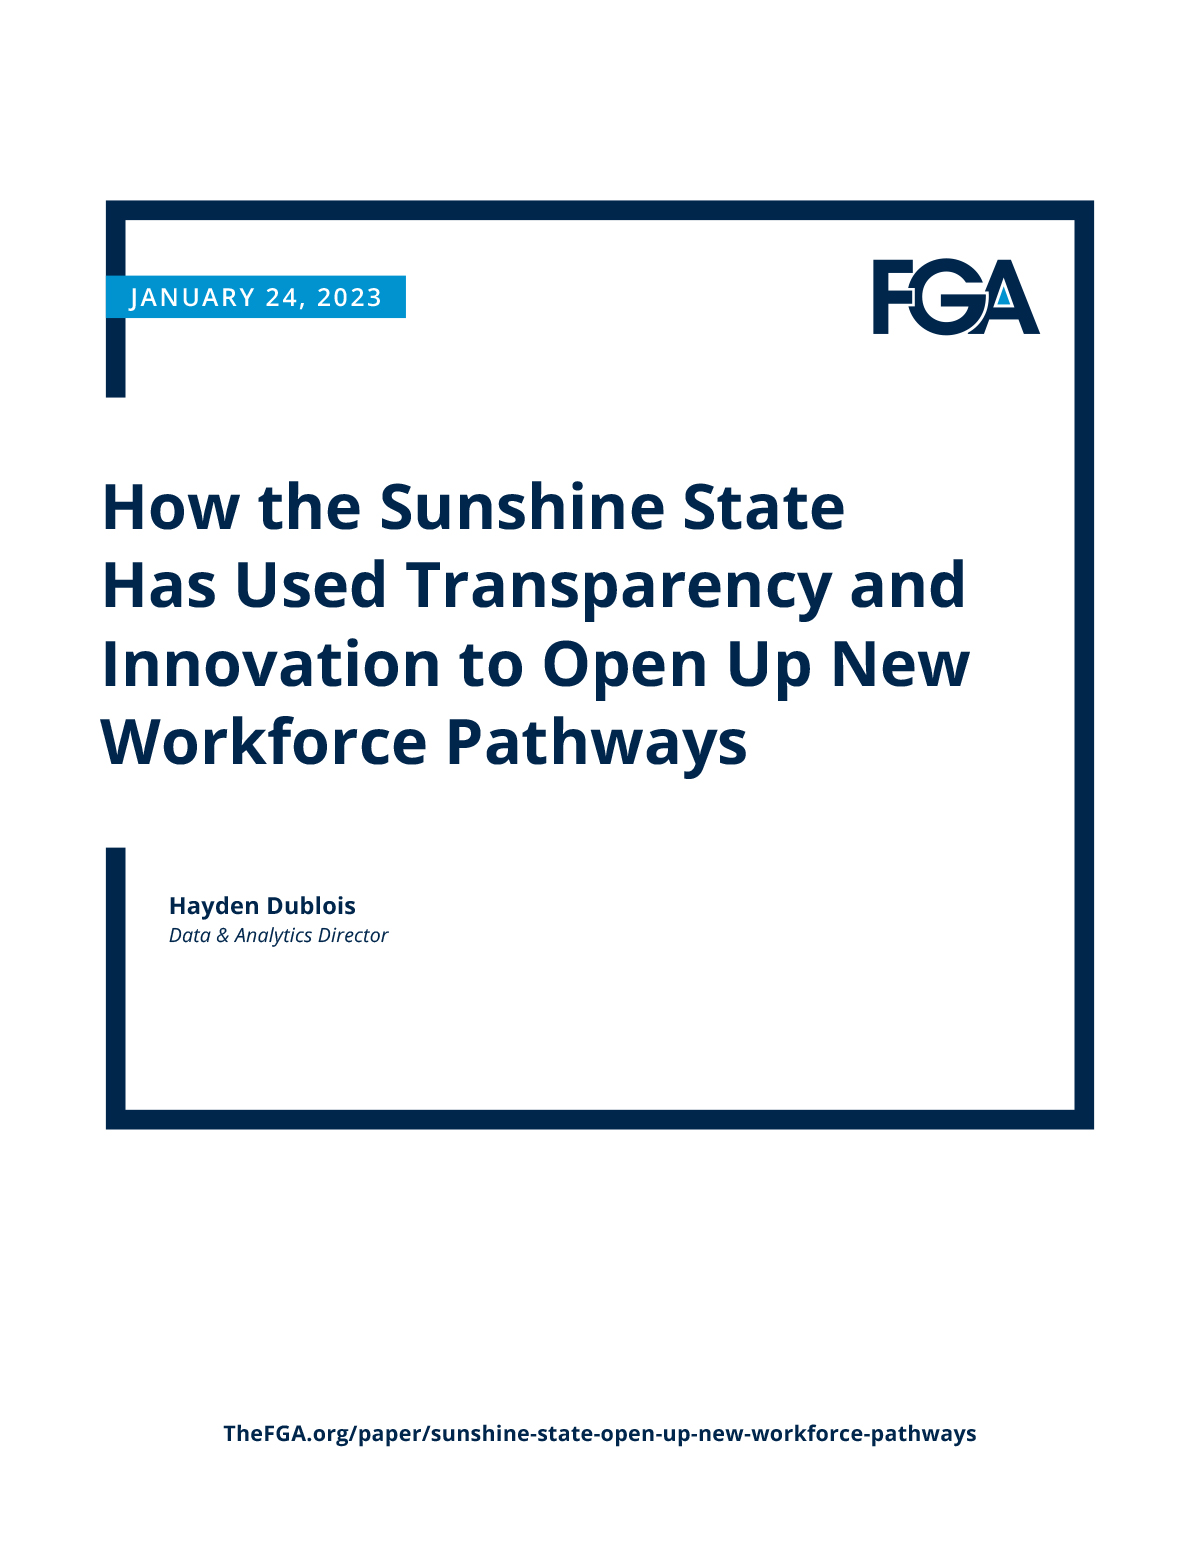 How the Sunshine State Has Used Transparency and Innovation to Open Up New Workforce Pathways